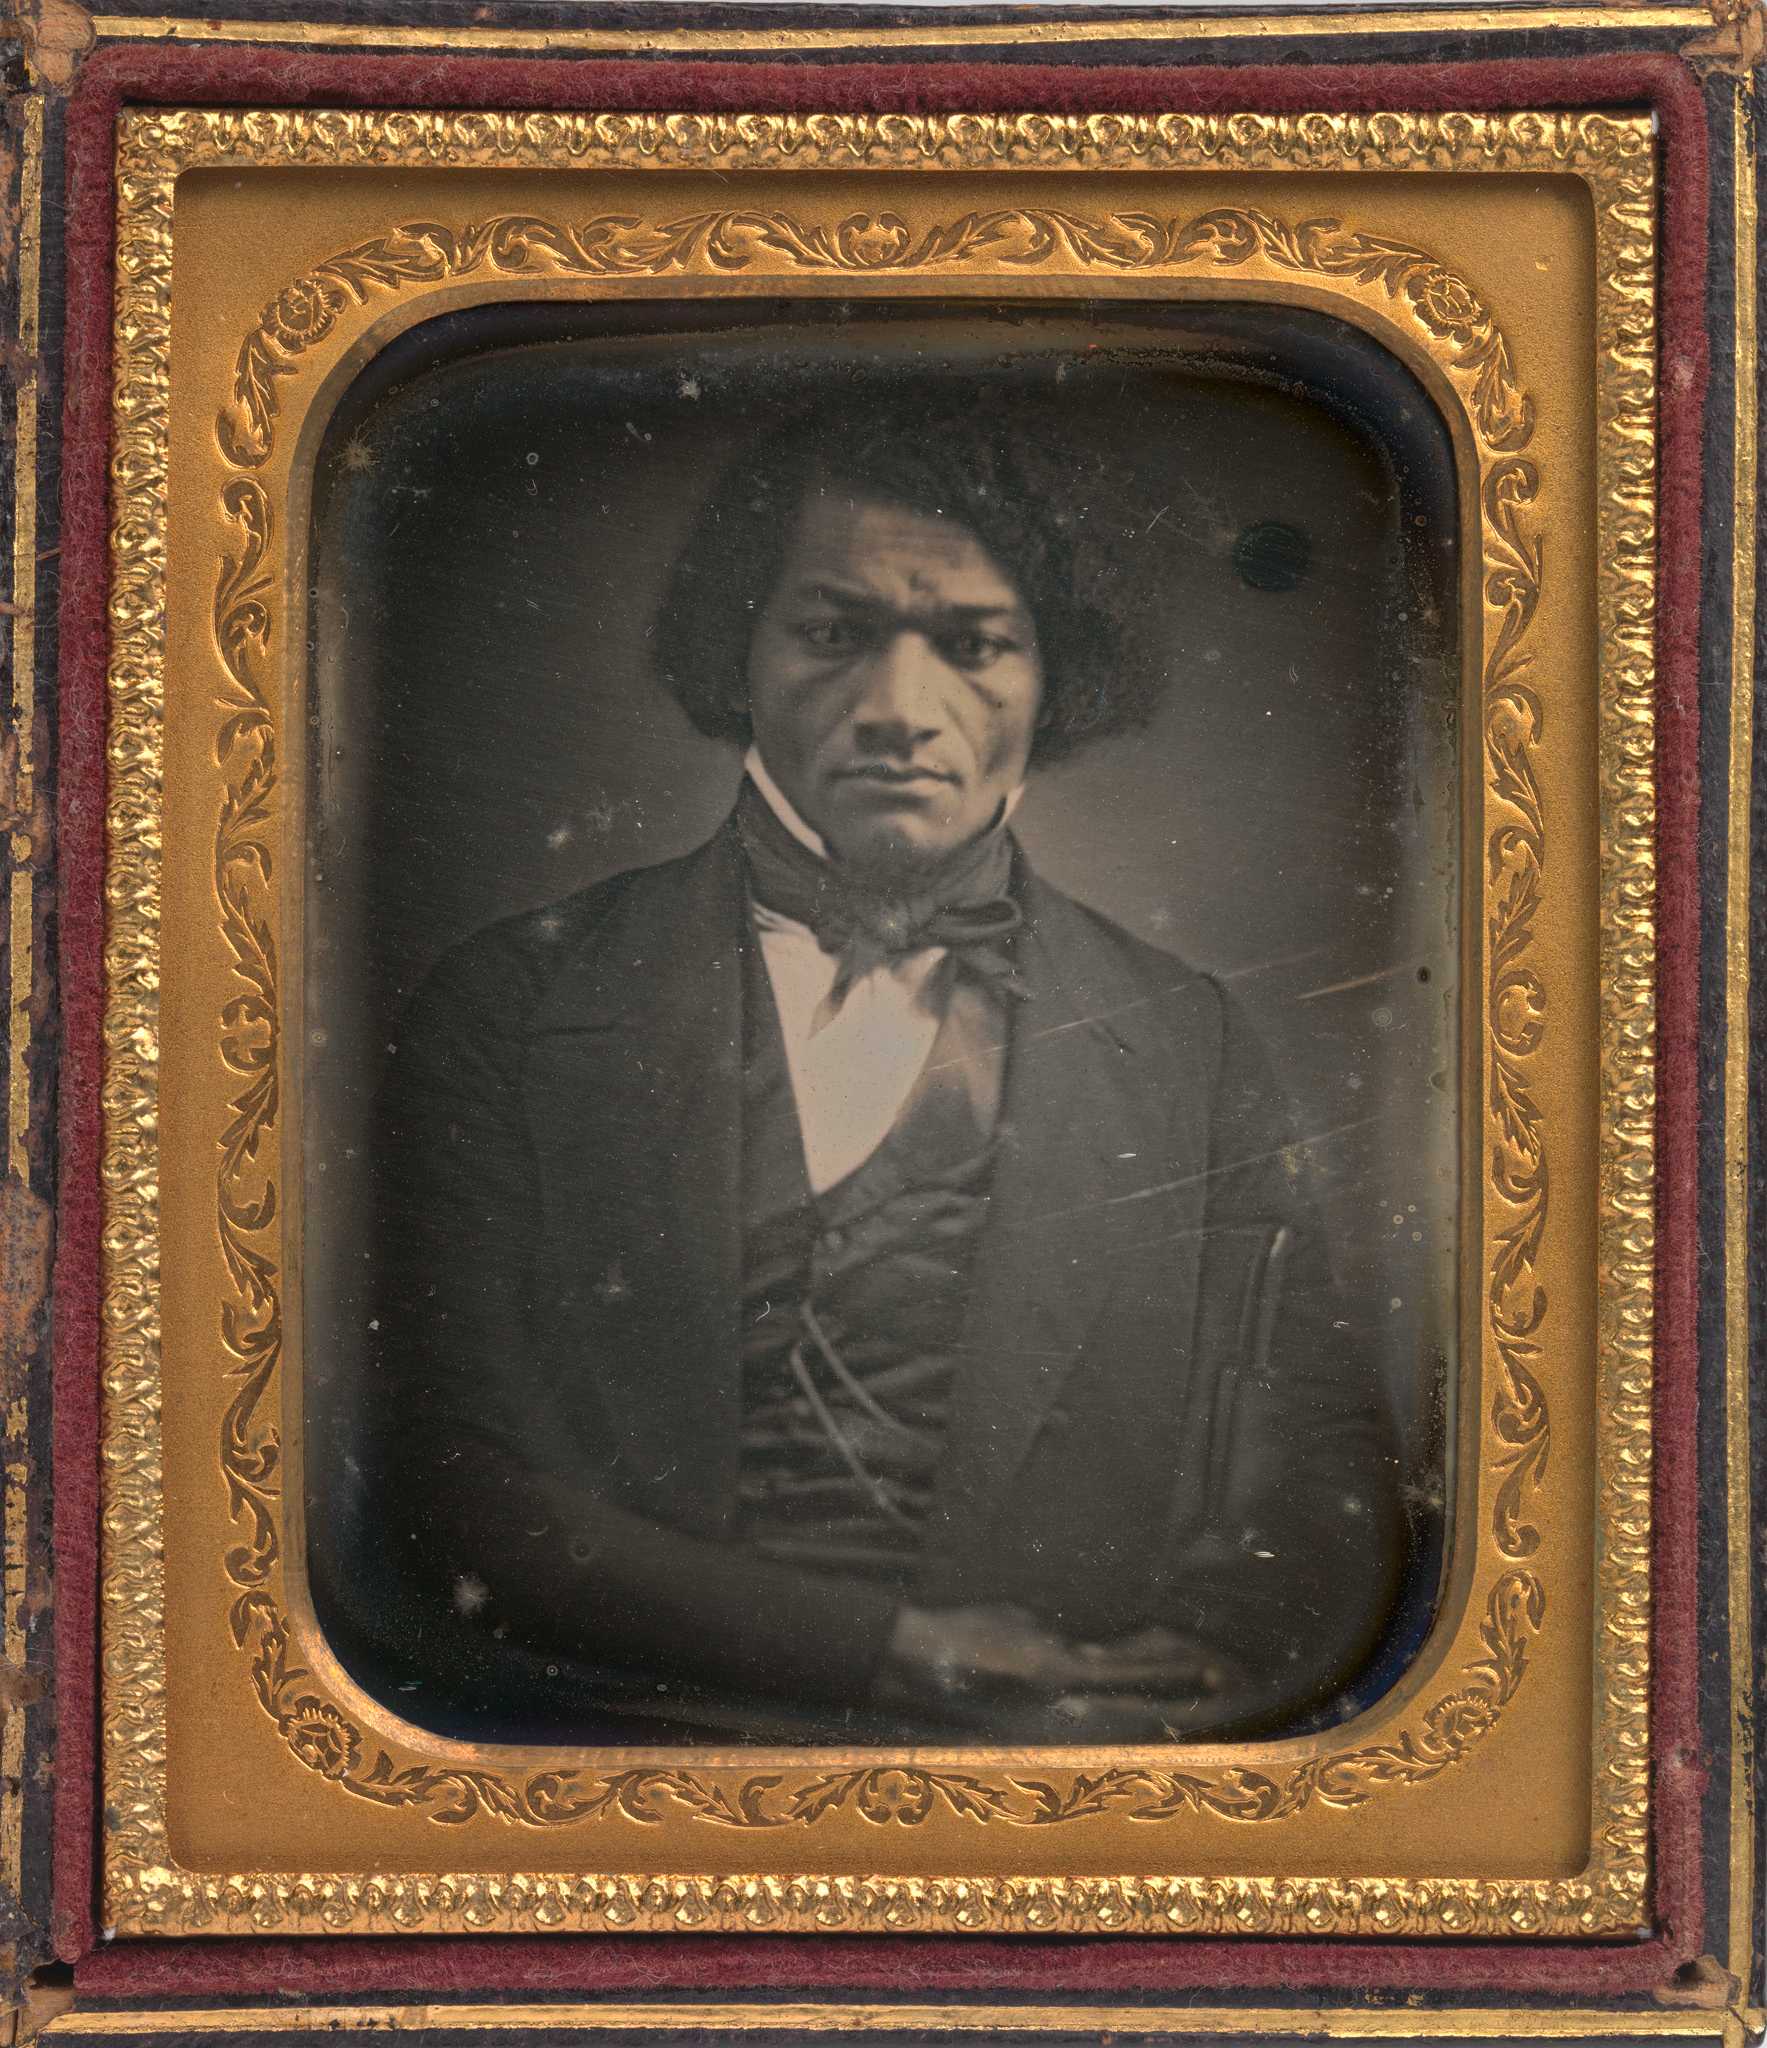 Photograph of Frederick Douglass in a gold frame